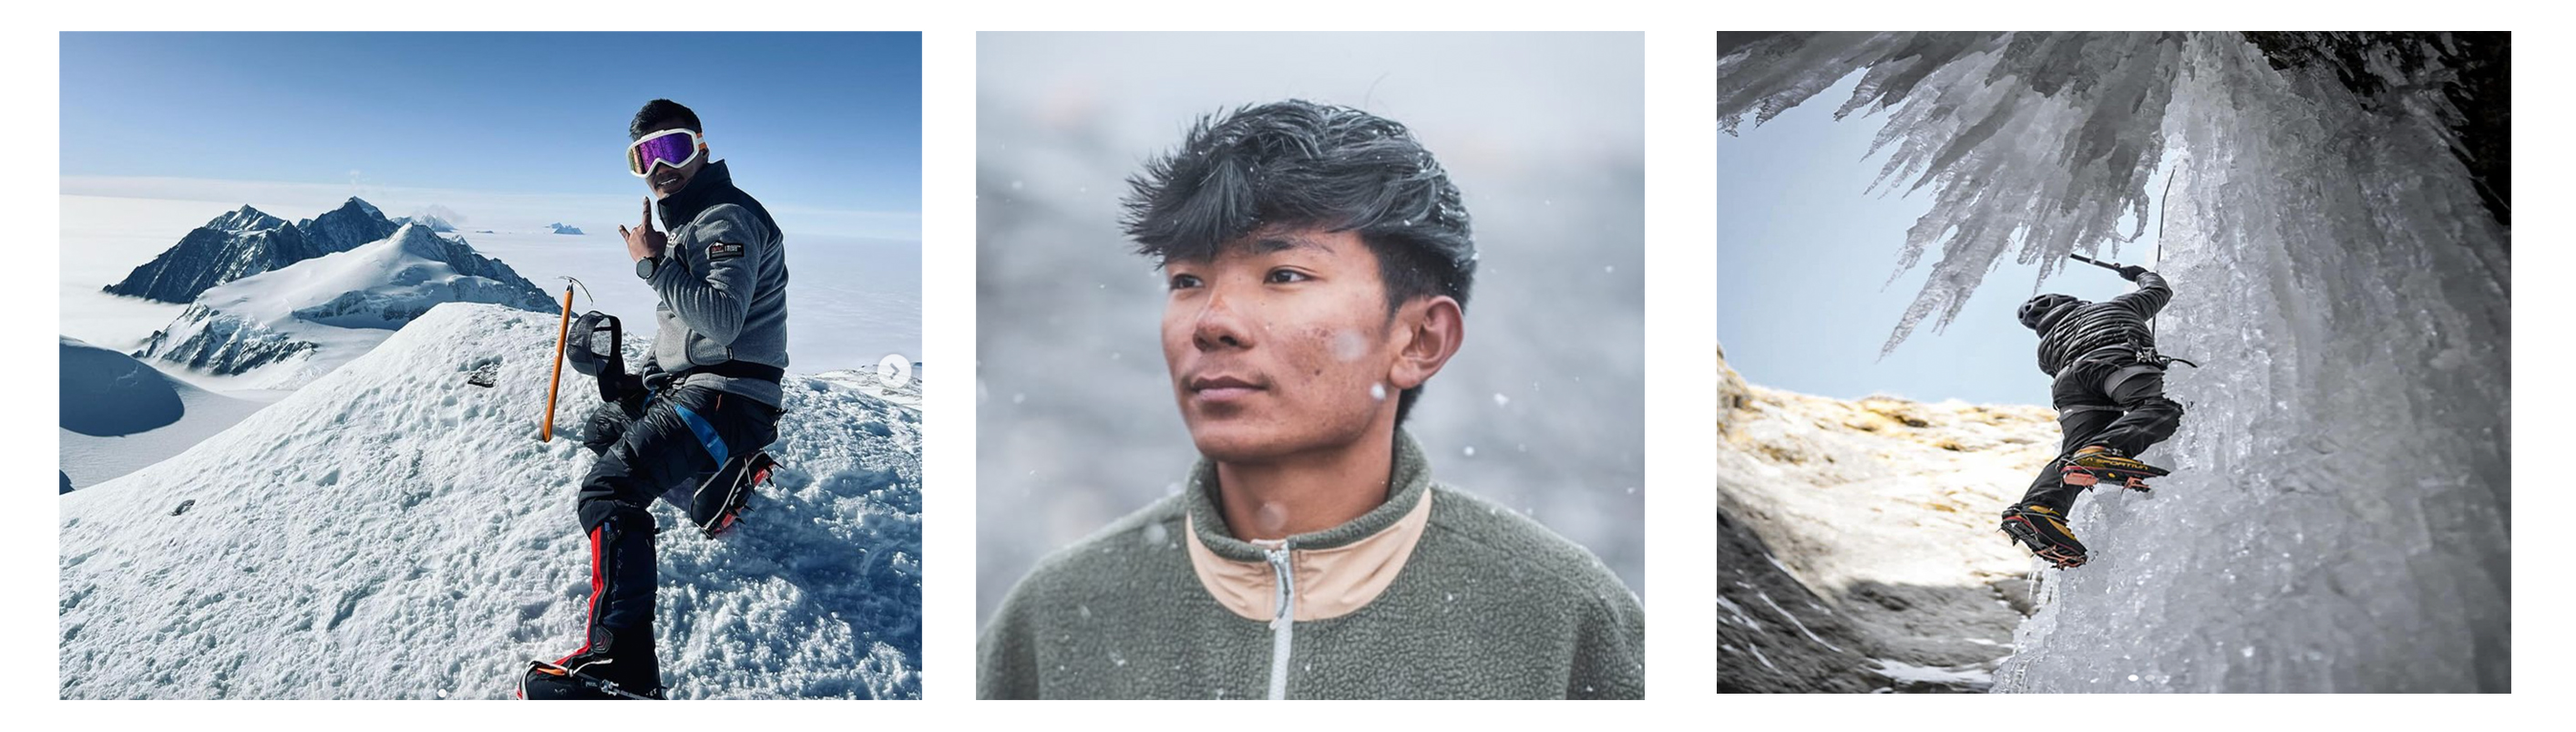 Set of 3 photos of a man climbing the mountain in the left right and the profile picture of the climber in the center. 